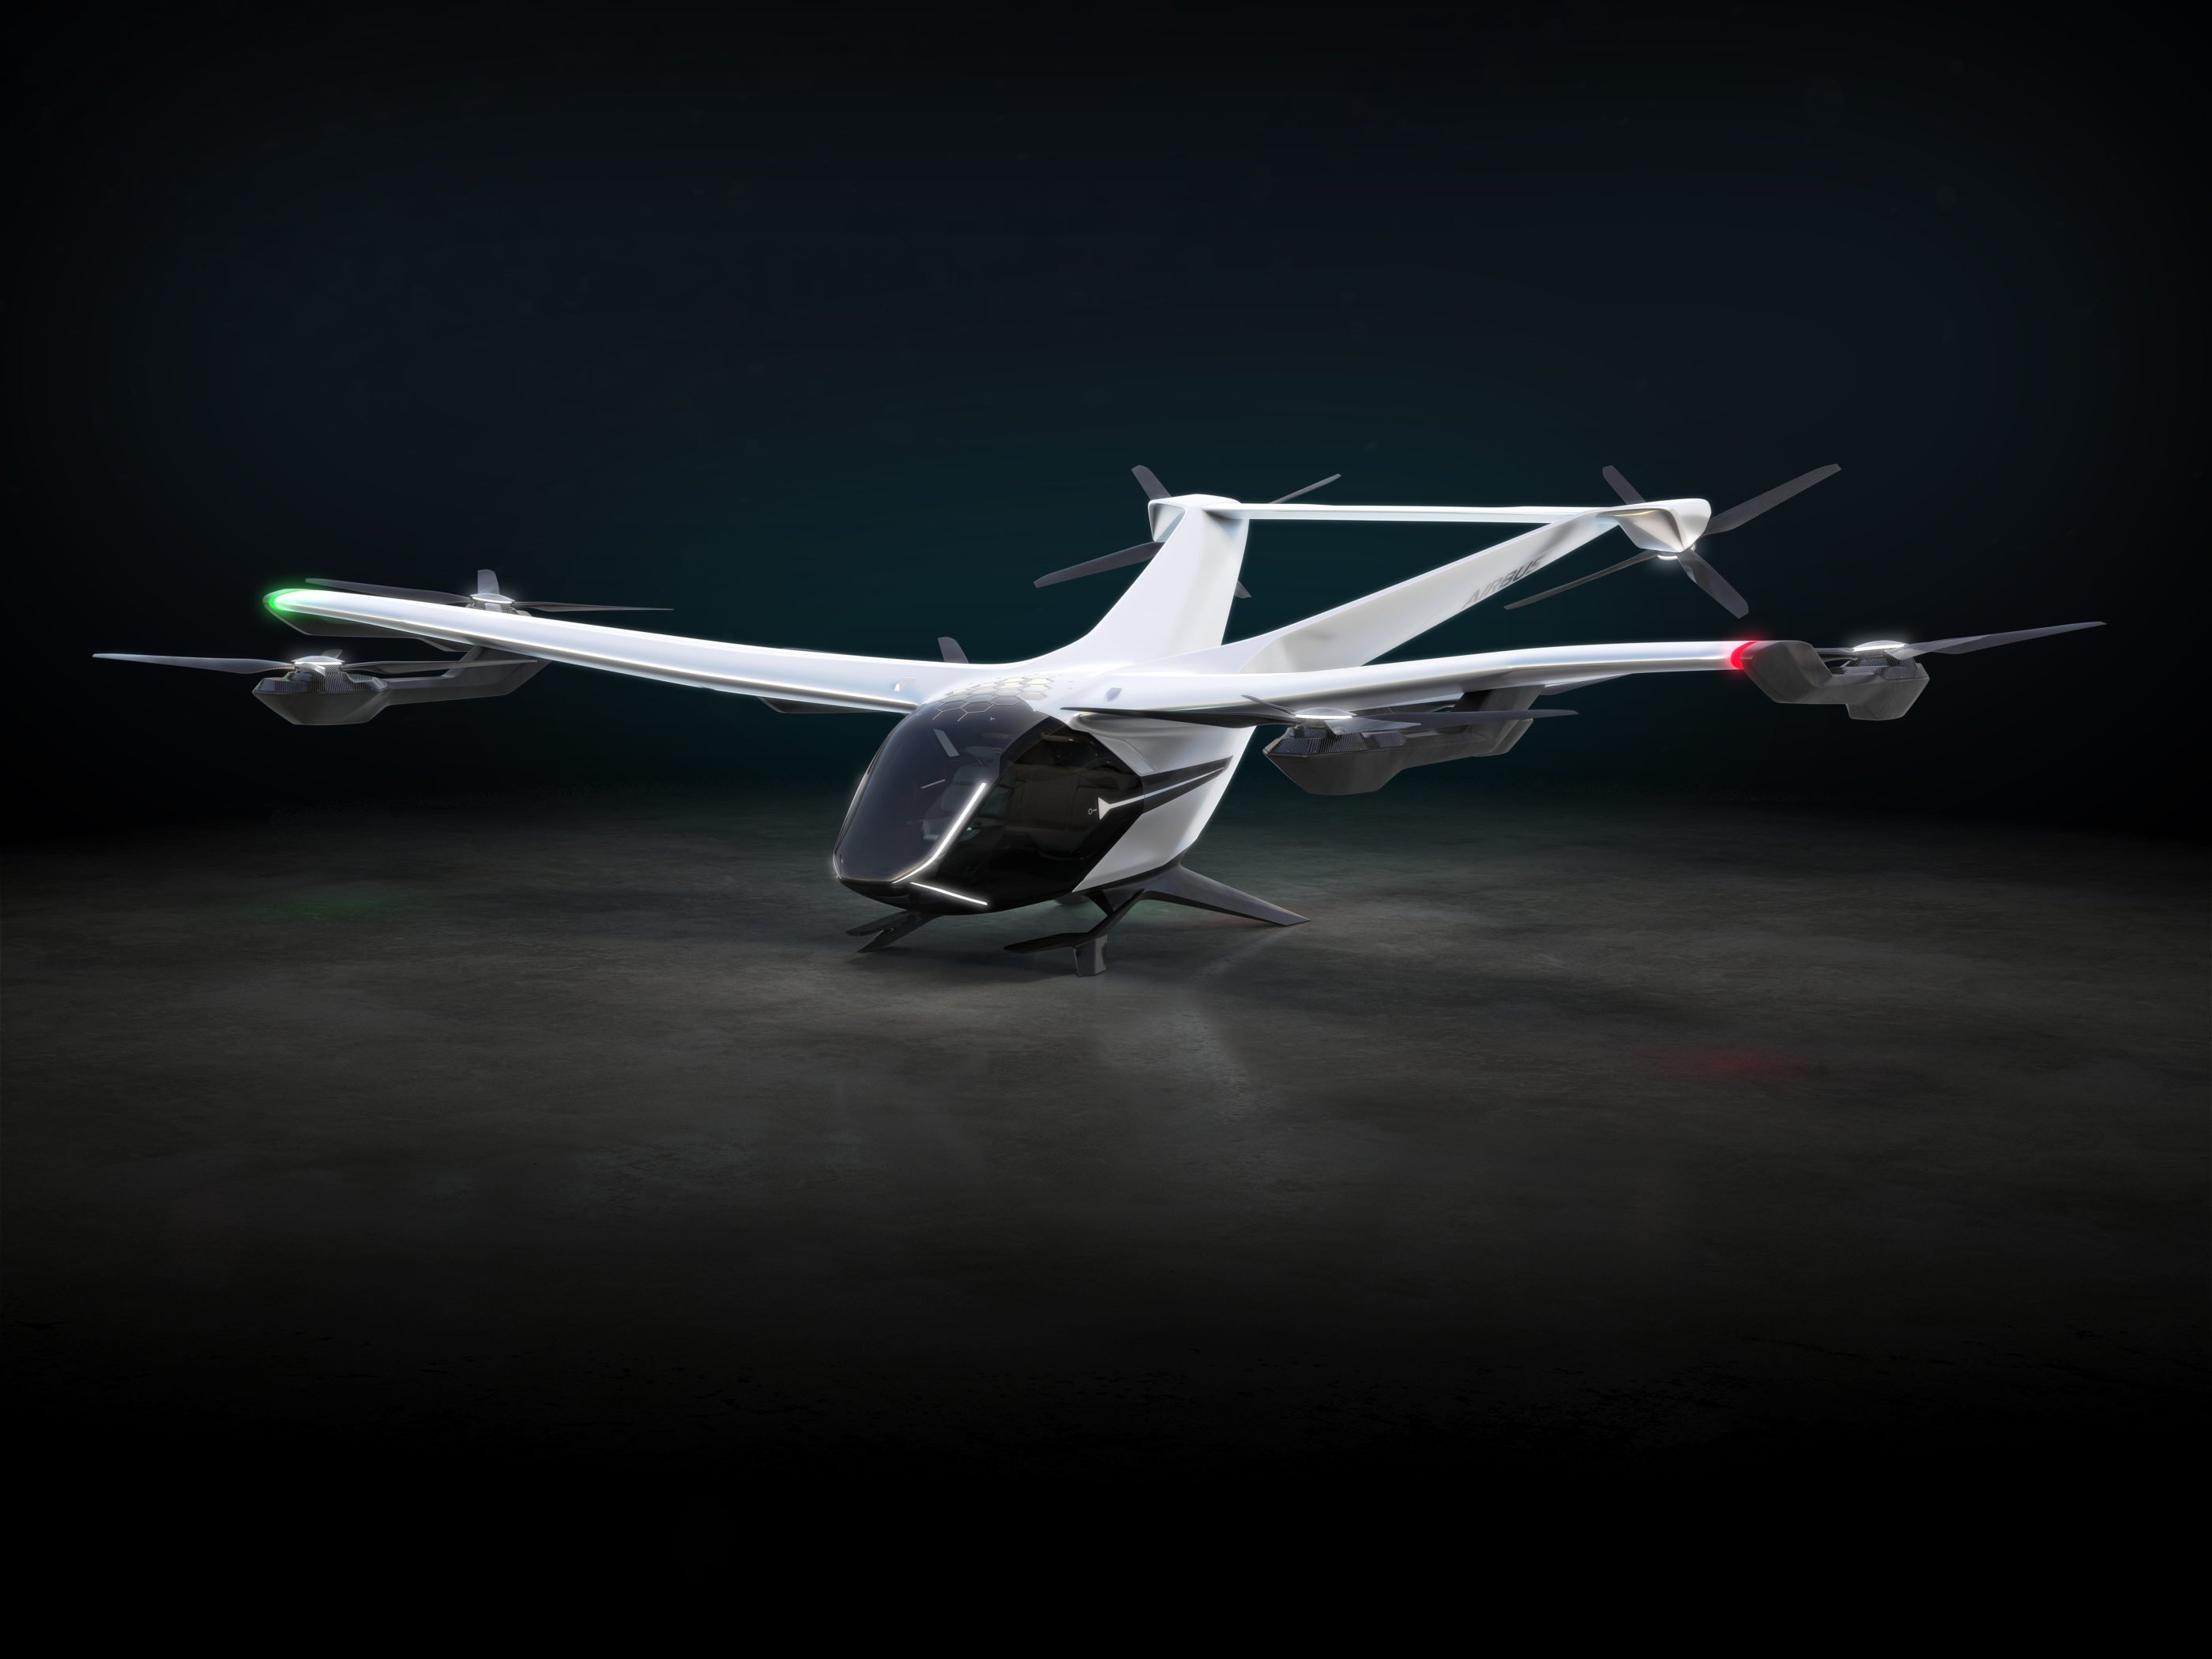 The eVTOL will have an operating range of 80 kilometers (50 miles) and a cruise speed of 120 km/h (75 mph). Airbus Image